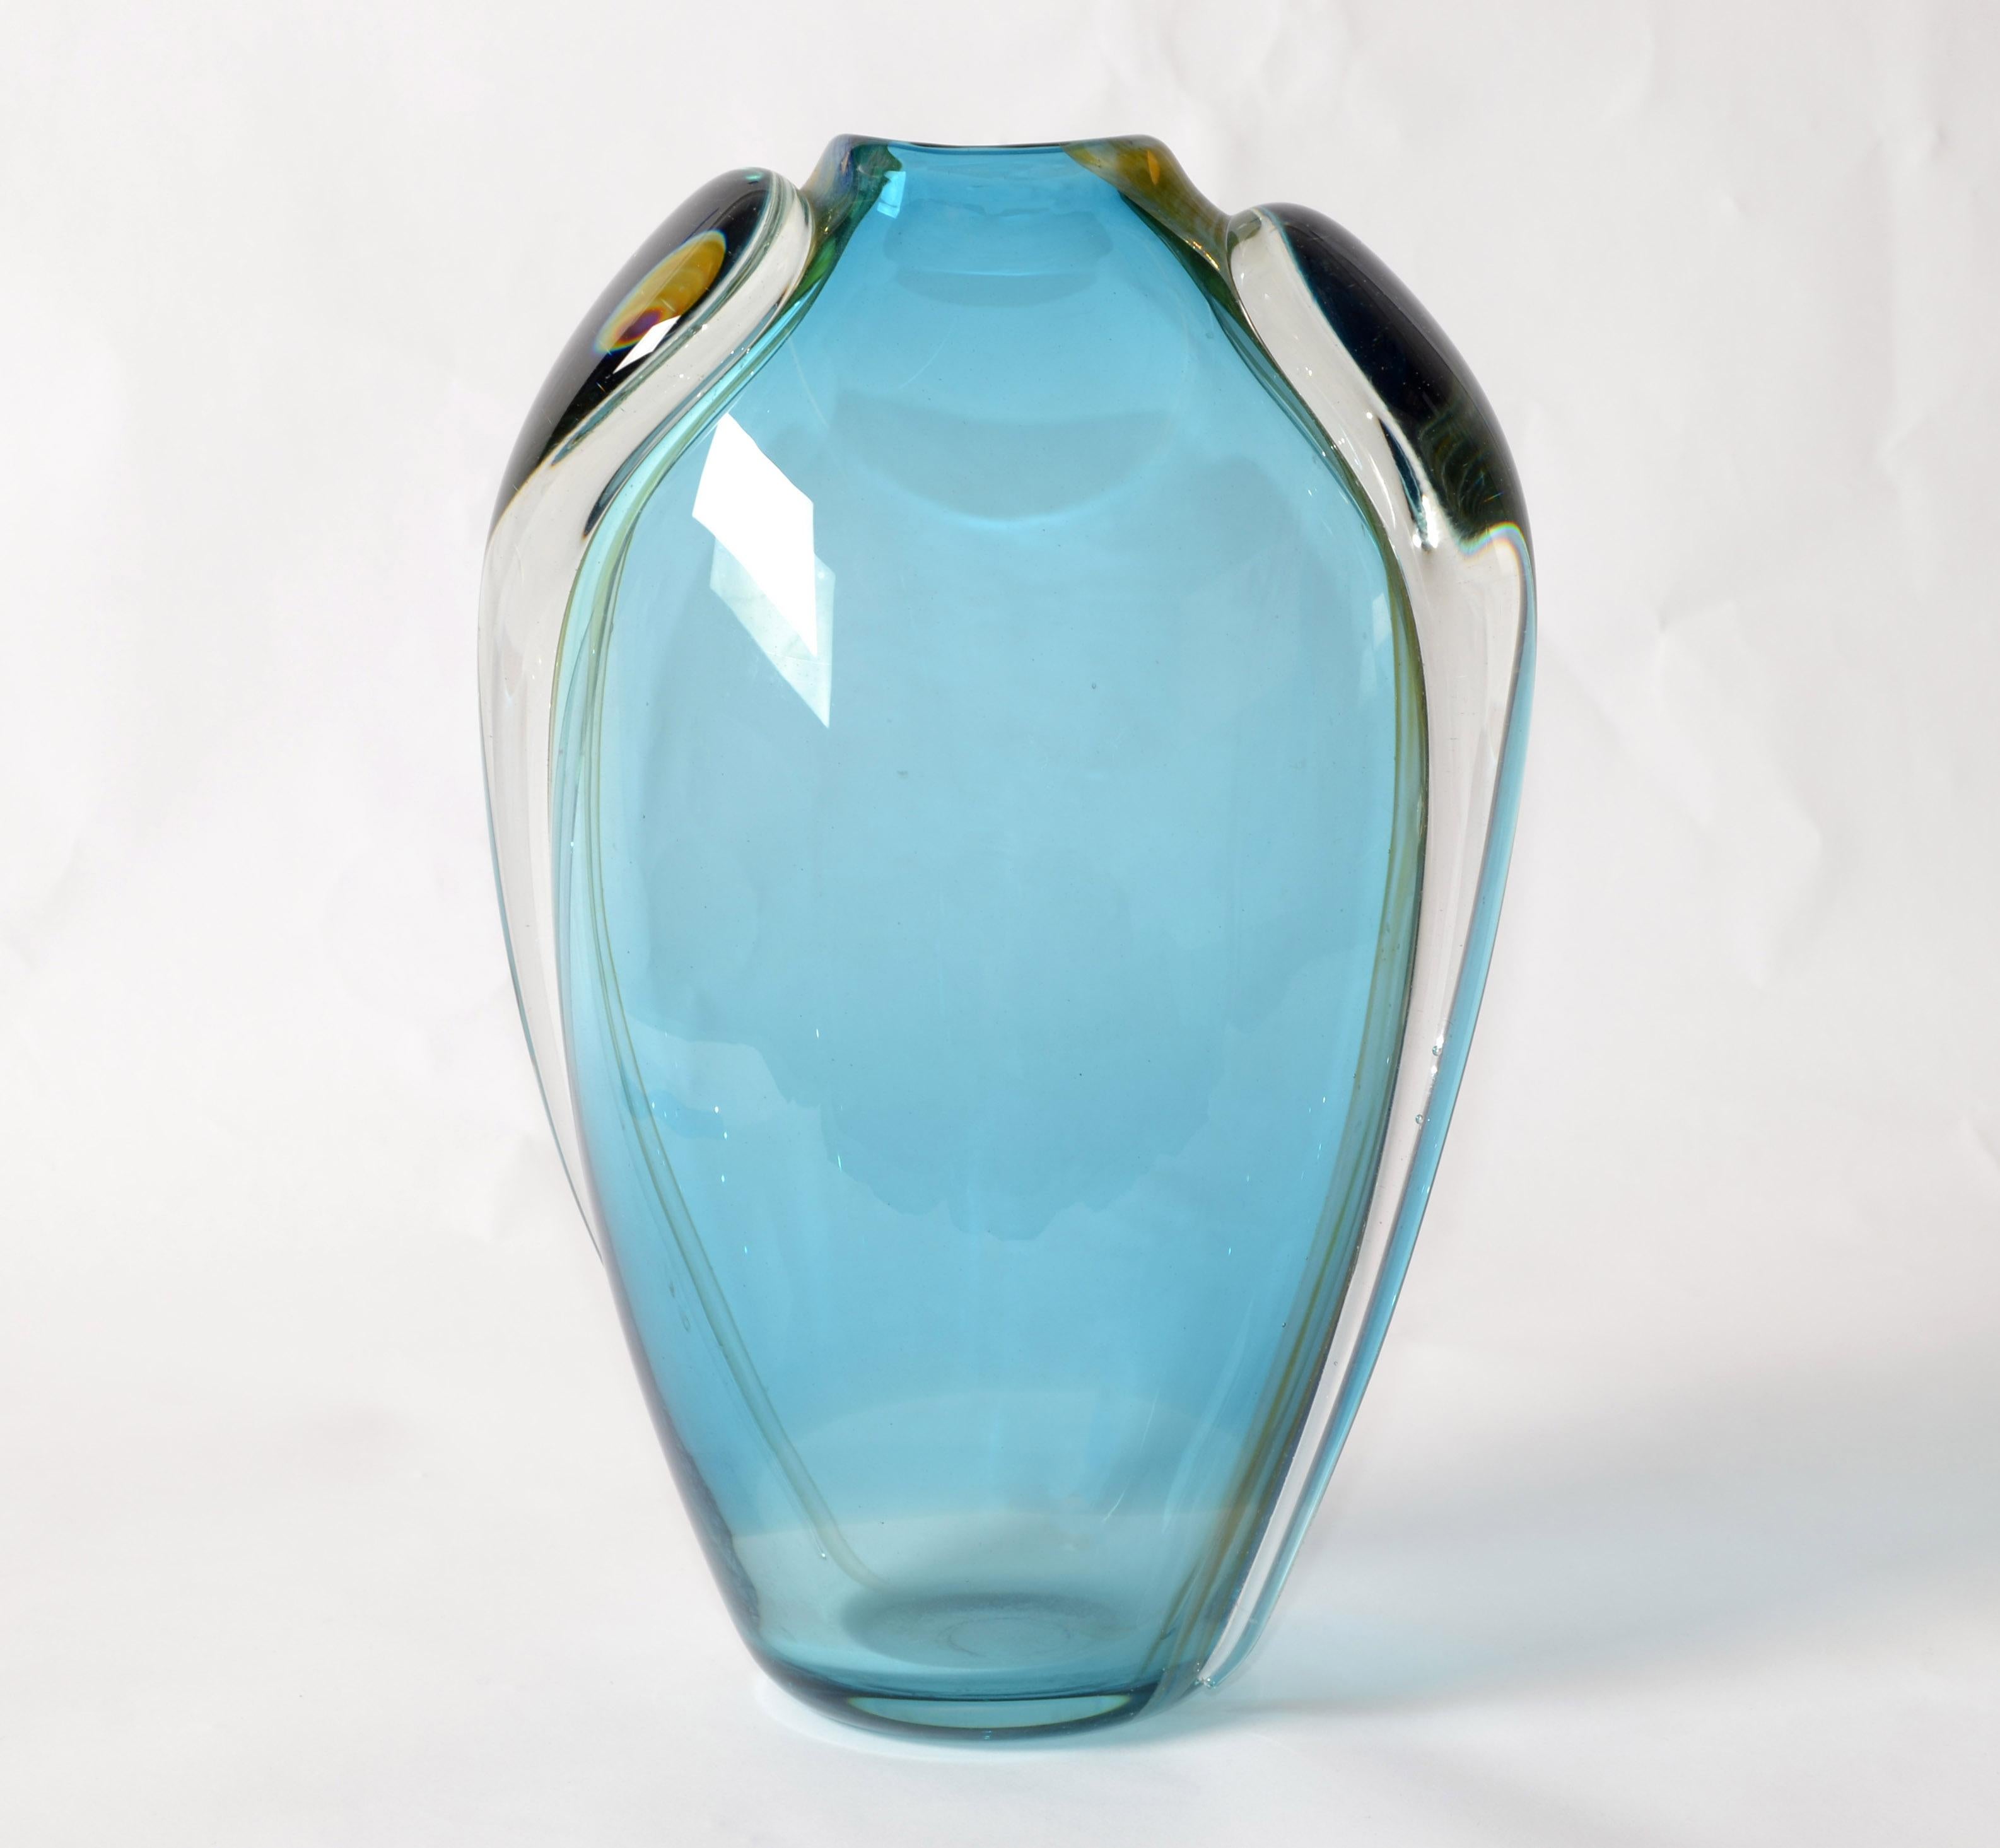 Artist Thomas Buechner III created this beautiful studio piece of hot blown art glass vase in light blue, gold and transparent color.
Mid-Century Modern Op Art made in 1980 at the Vitrix Studio in America.
In good vintage condition with some wear